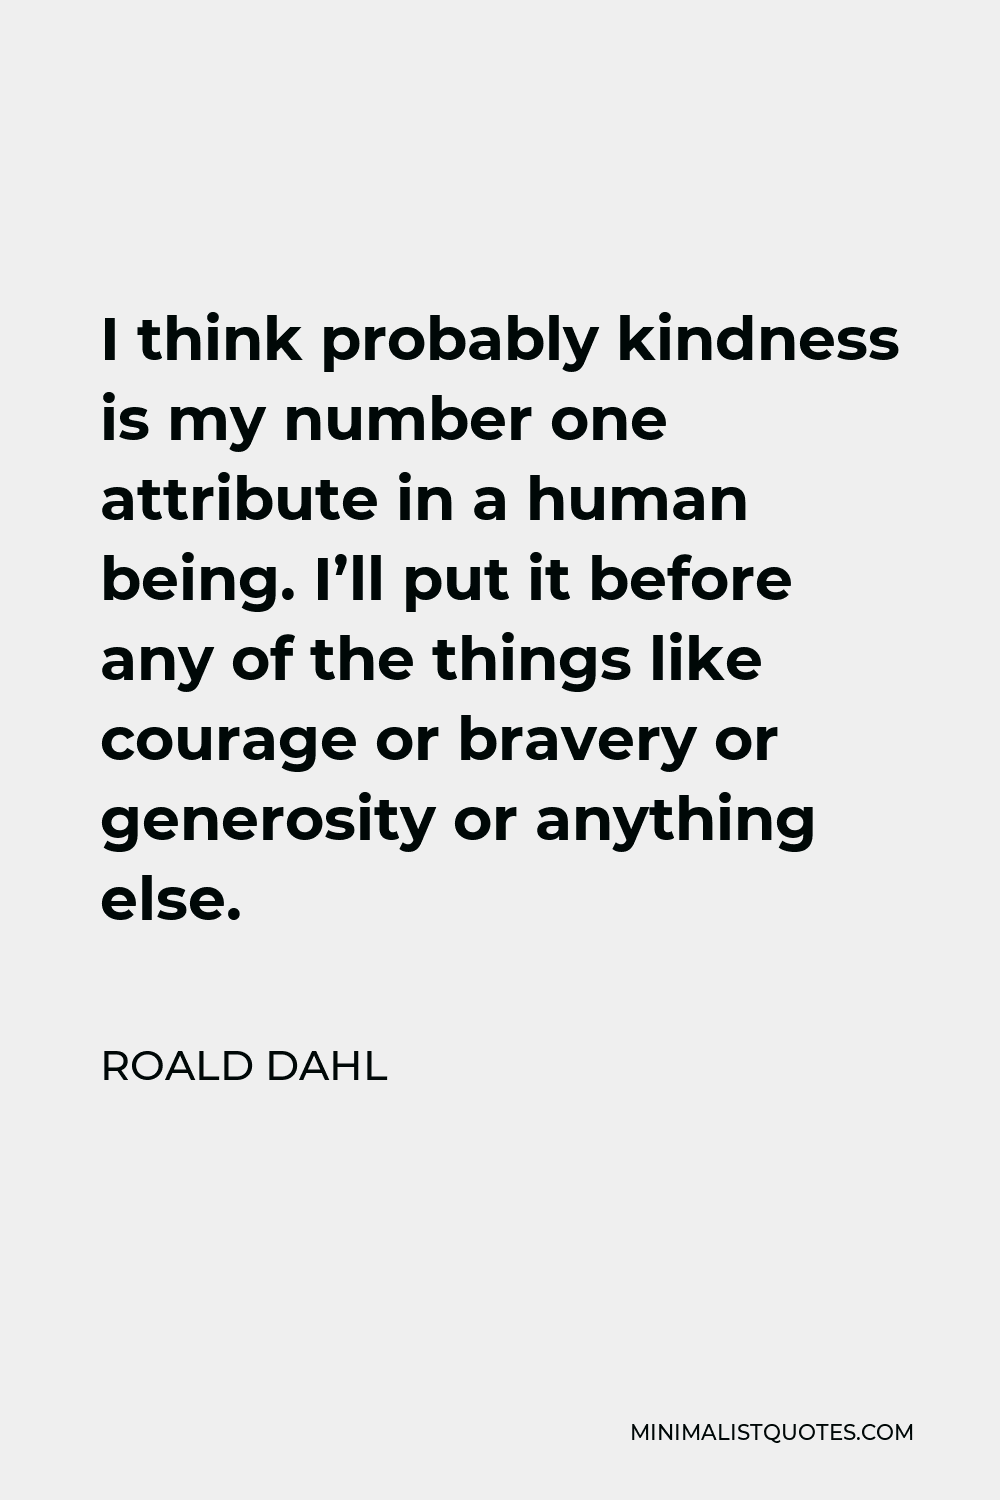 Roald Dahl Quote - I think probably kindness is my number one attribute in a human being. I’ll put it before any of the things like courage or bravery or generosity or anything else.